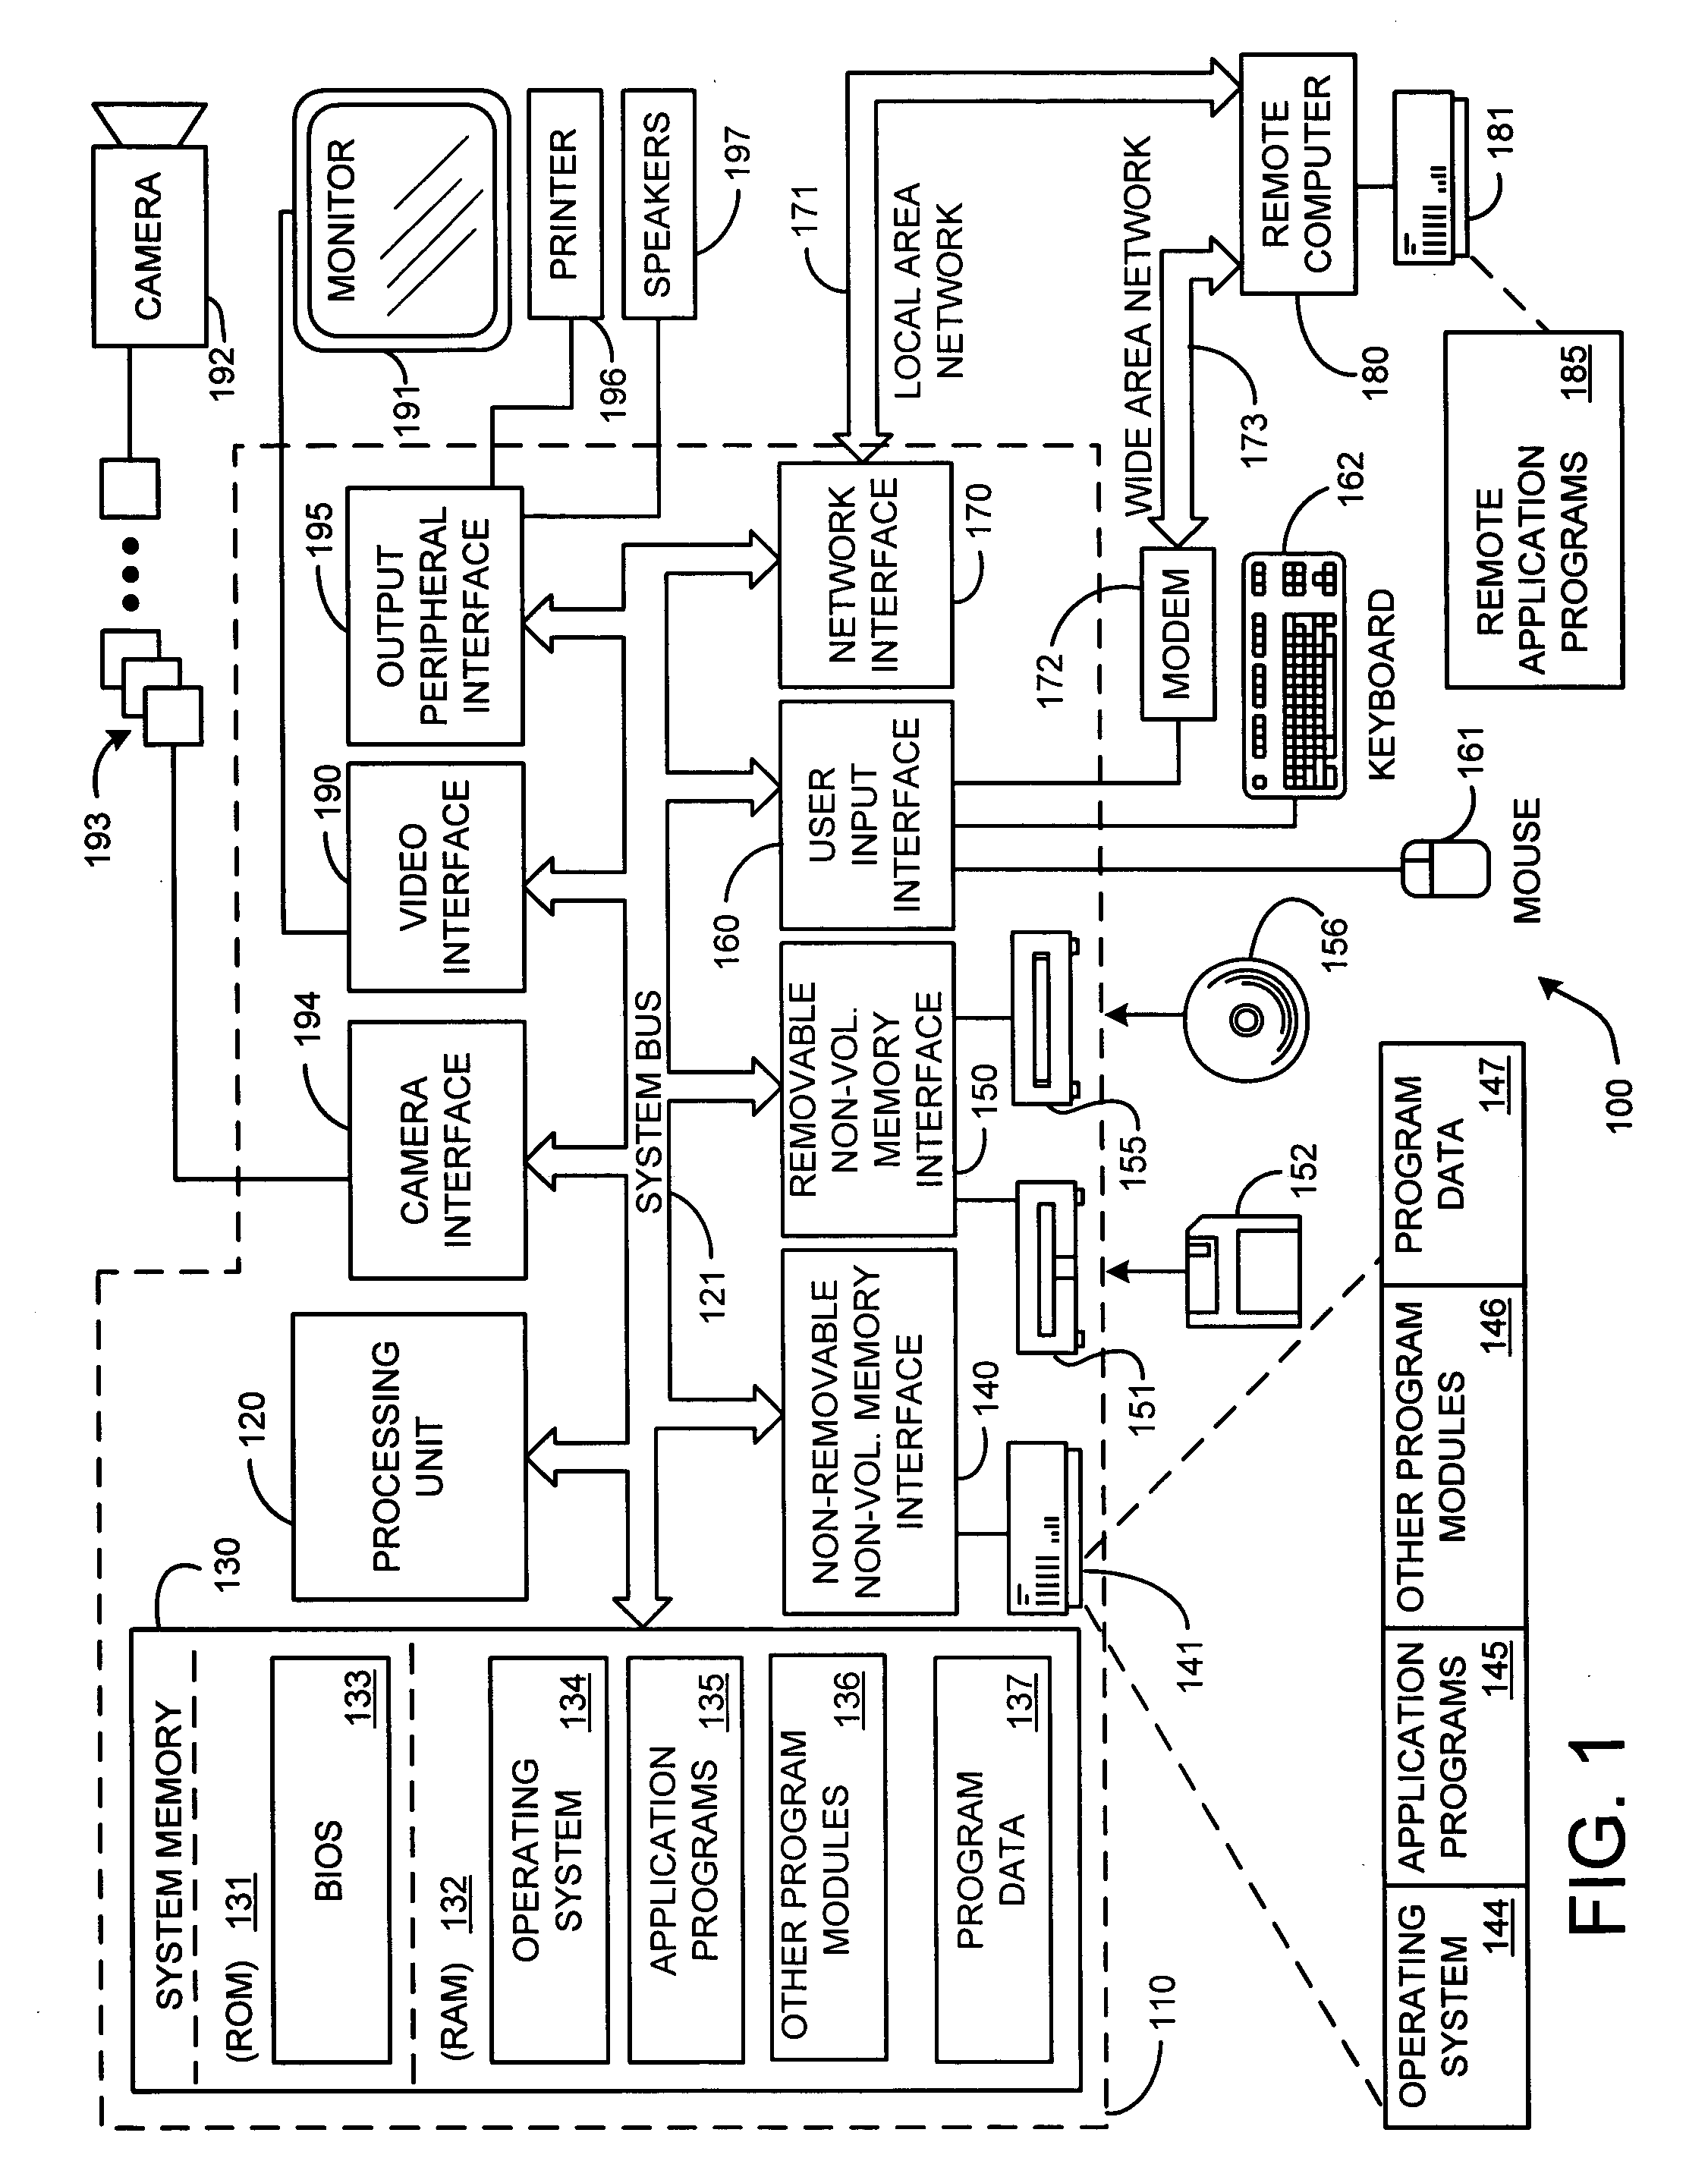 System and process for compressing and decompressing multiple, layered, video streams employing spatial and temporal encoding